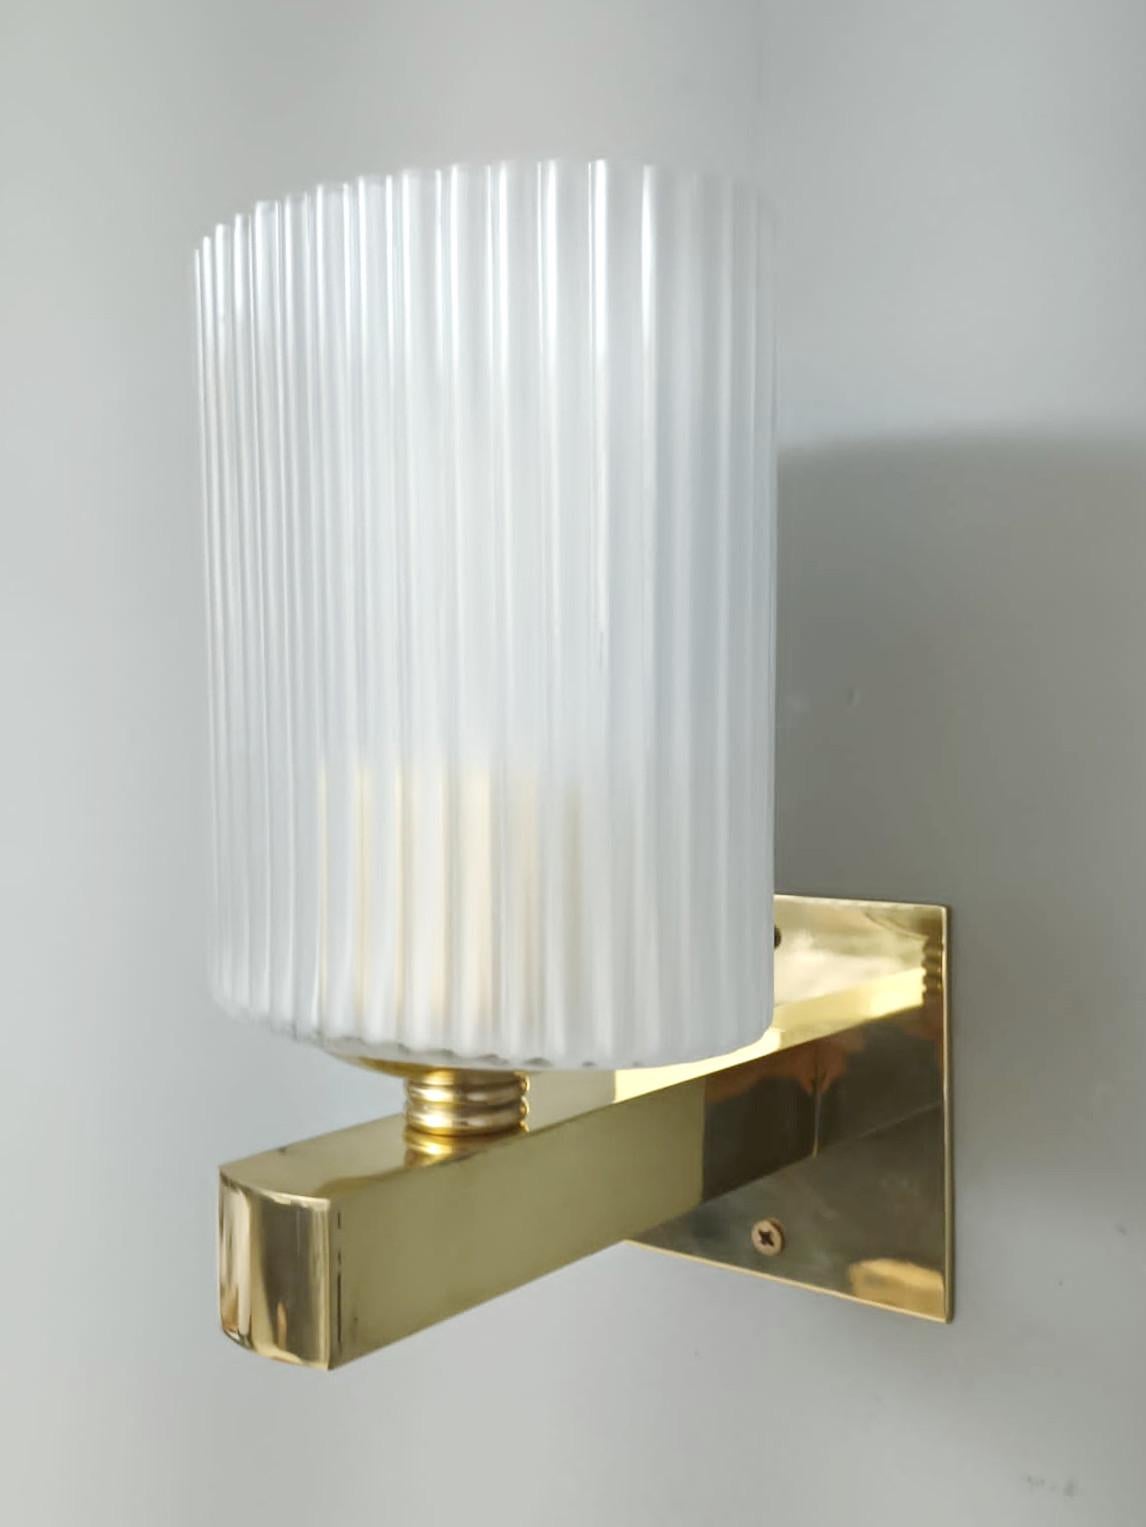 Italian wall lights with frosted white ribbed Murano glass shades mounted on brass frames / Made in Italy in the style of Barovier e Toso, circa 1950s.
Measures: height 9 inches, width 5 inches, depth 6 inches, backplate width 4 inches and height 4